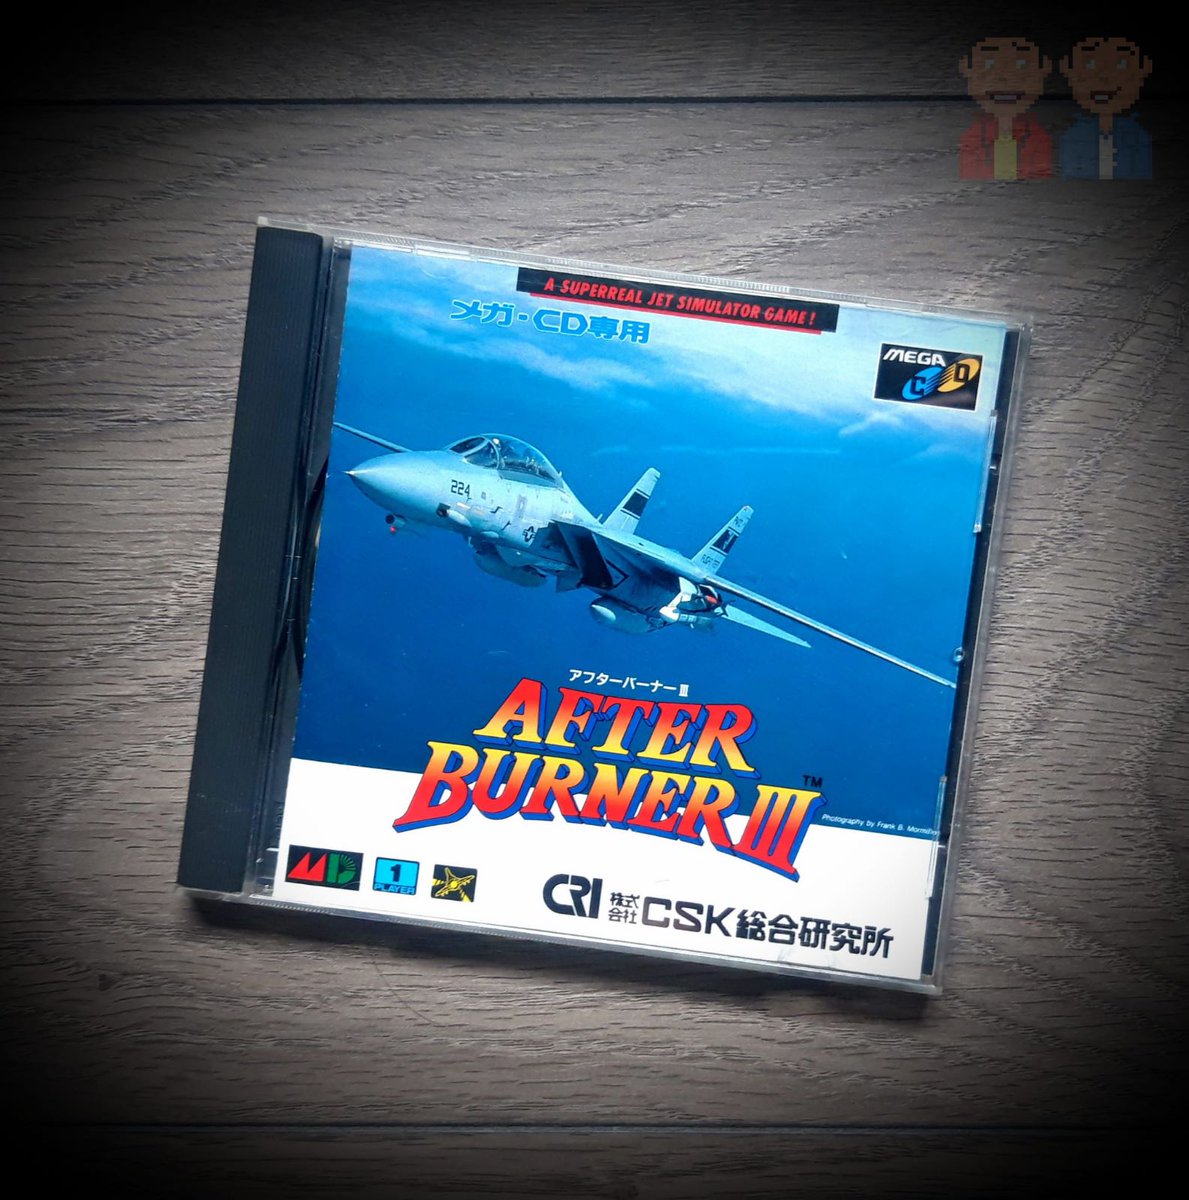 Soaring into #MegaCDmonday we've got After Burner III, the Shoot 'em up sequel that's actually a port of #SEGA's G-lock Air Battle for the #Arcade. 

It wasn't received well, but was it really that bad? #AfterBurner Fans?

#GamersUnite #RETROGAMING #retrogames #retrogamer #Retro